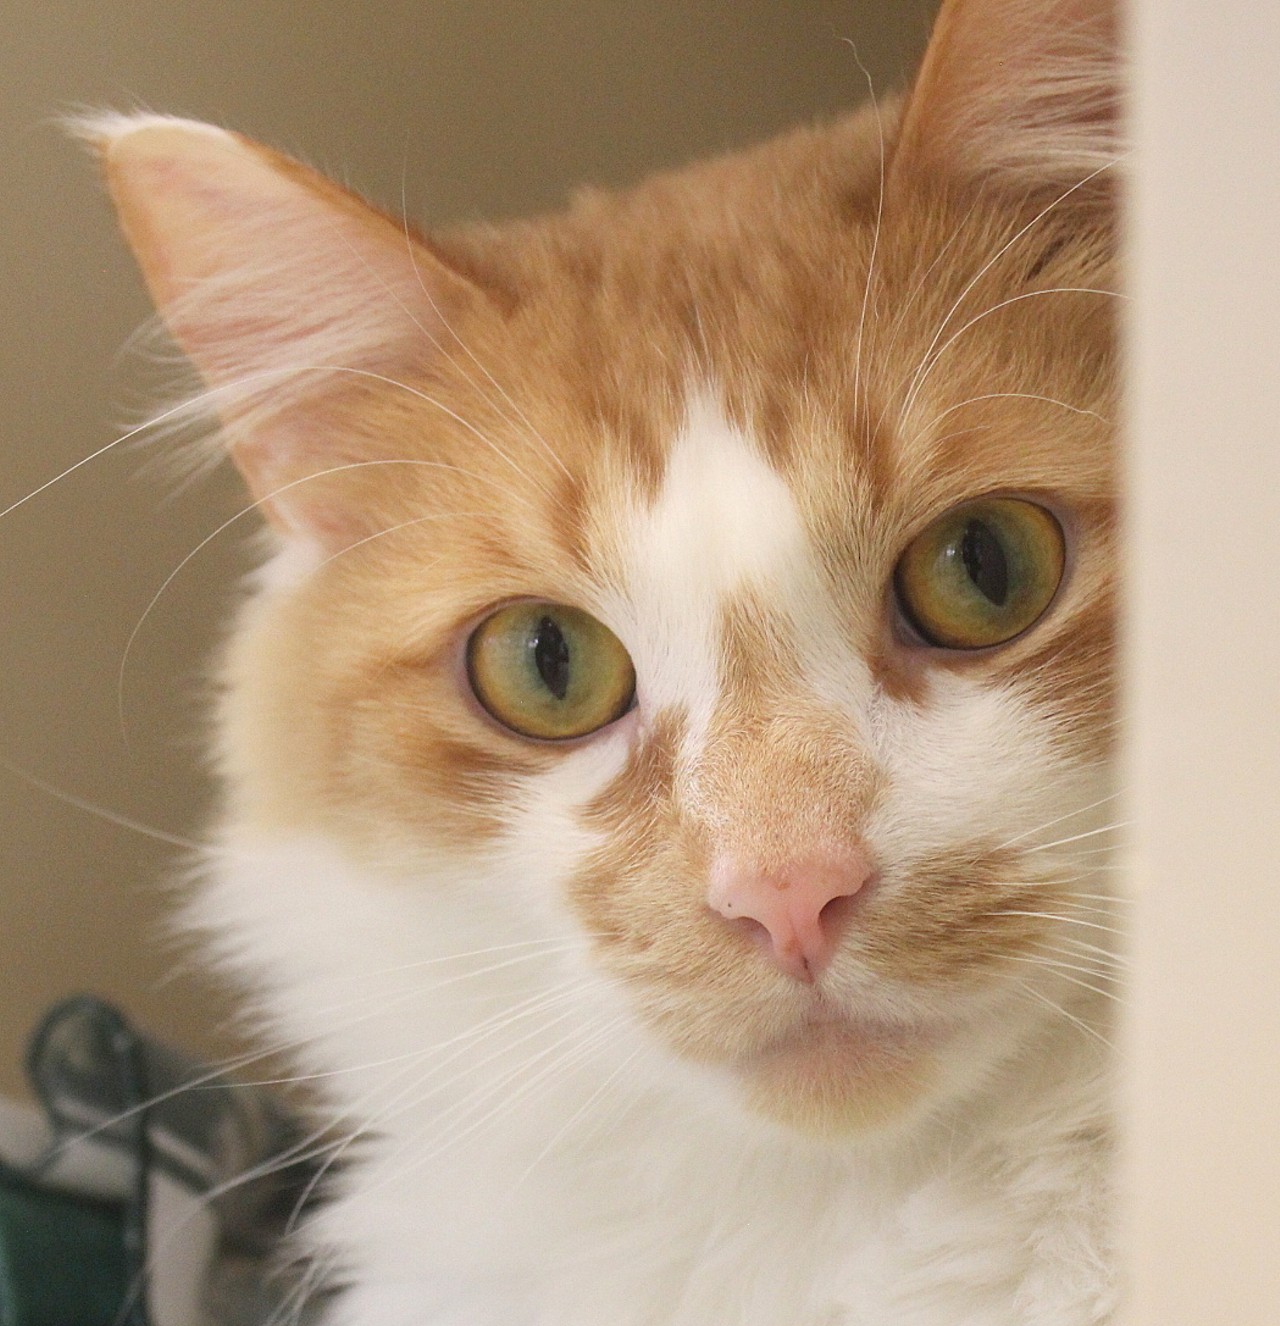 NAME: King Arthur
GENDER: Male
BREED: Domestic Medium Hair
AGE: 3 years
WEIGHT: 10 pounds
SPECIAL CONSIDERATIONS: &#147;Hard-working&#148;, or barn cat
REASON I CAME TO MHS: Owner surrender
LOCATION: Mackey Center for Animal Care in Detroit
ID NUMBER: 862689